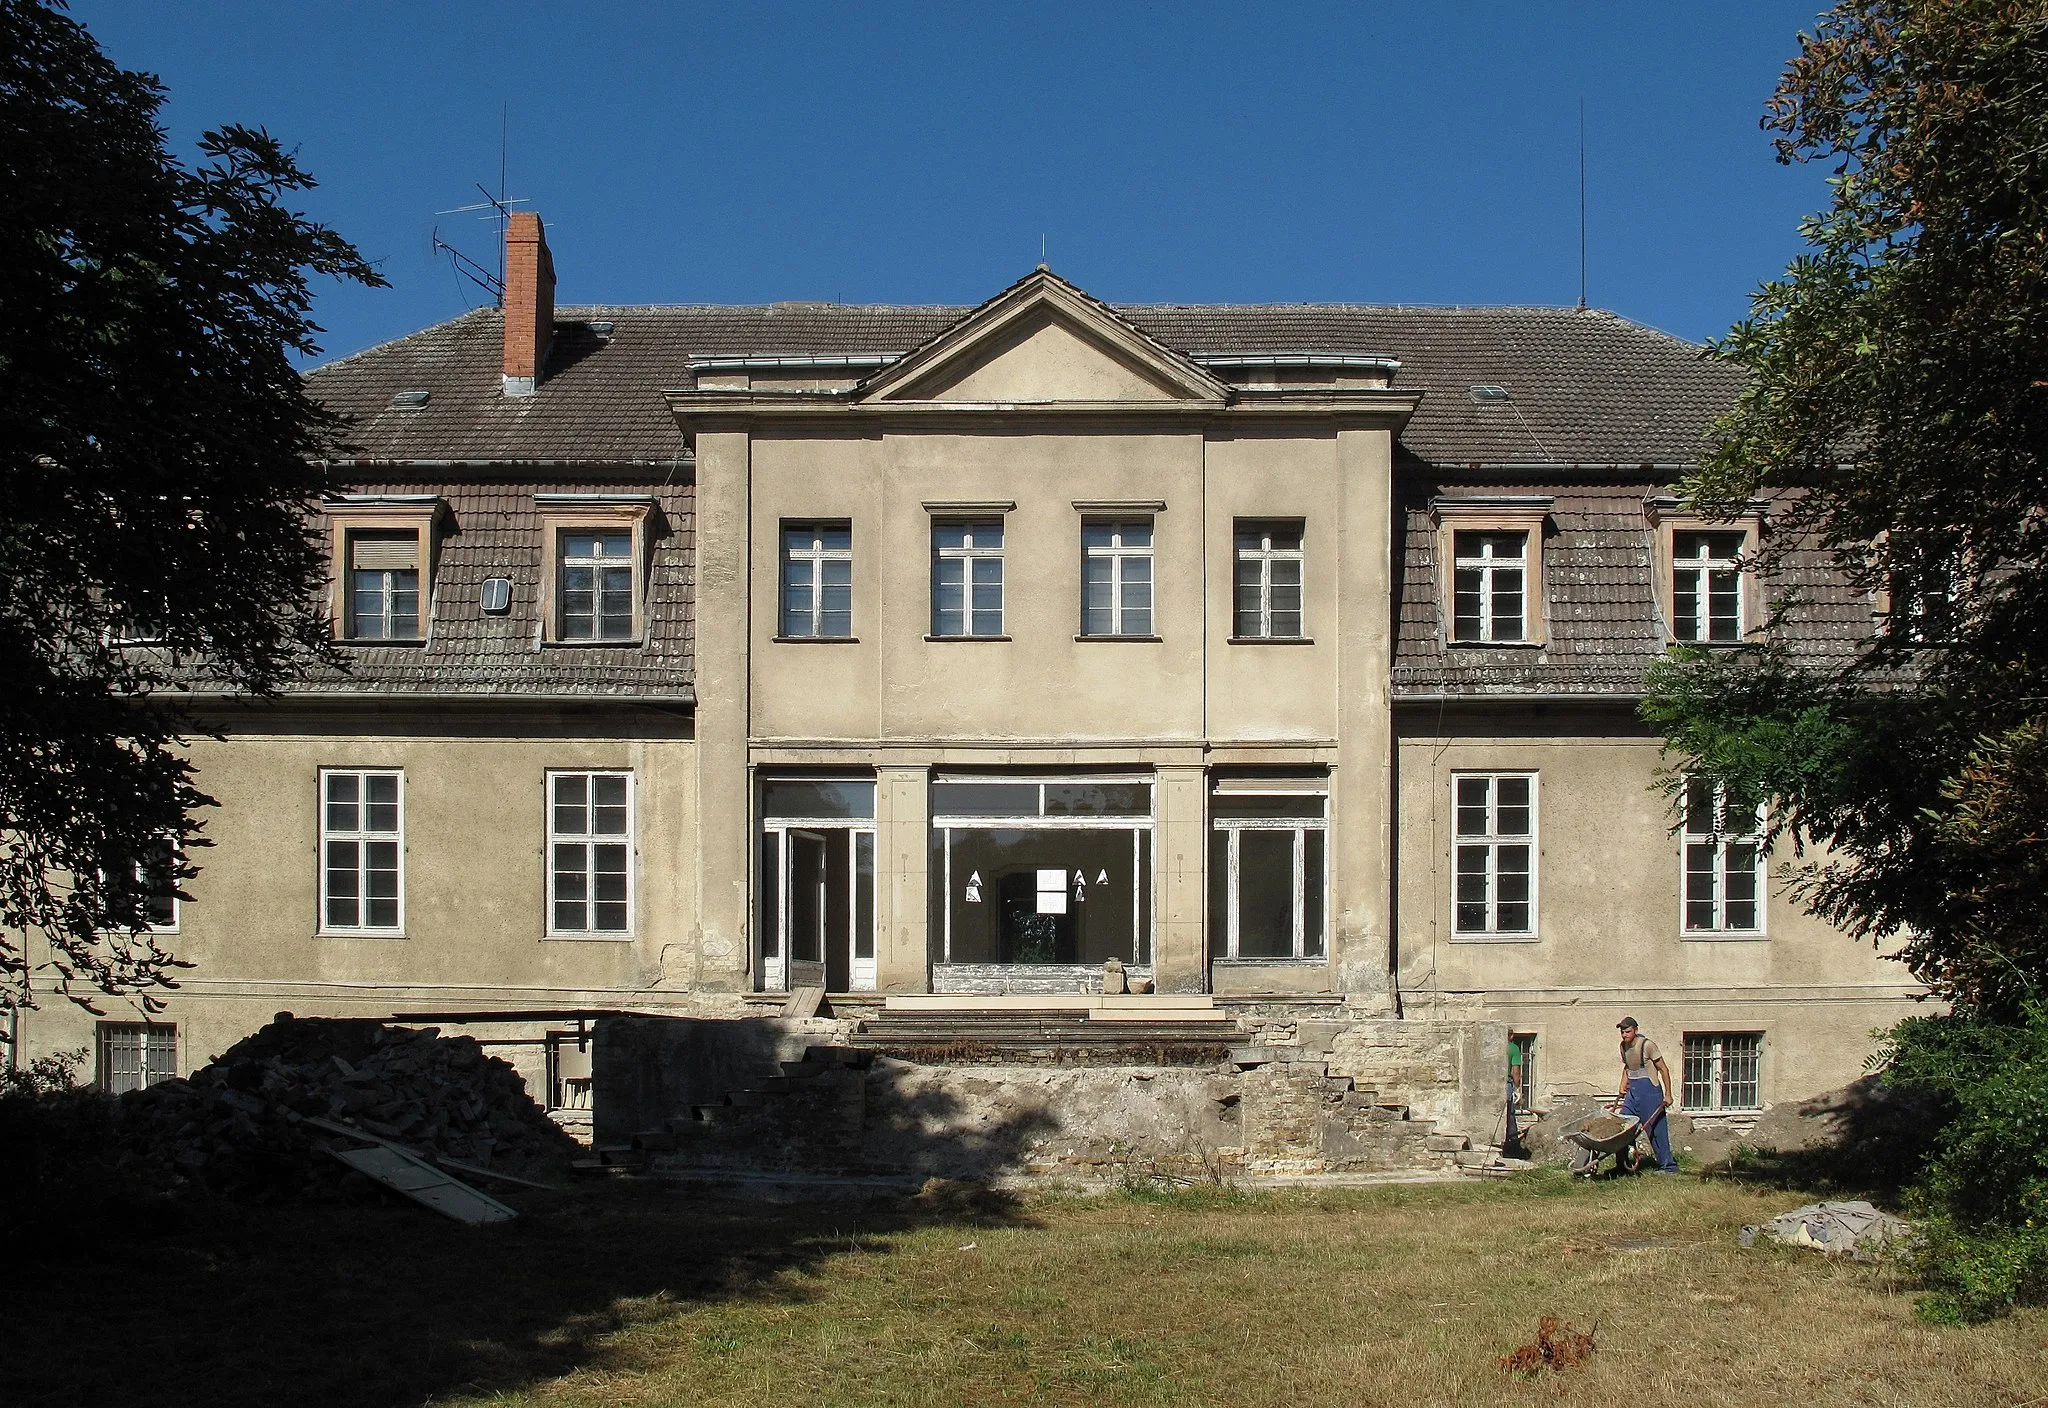 Photo showing: Listed manor house in Selchow, built in 1913 by the architect Alfred Breslauer for the banker Paul Mankiewitz. Since 1991 the historic house has been empty and was last dilapidated. In 2012 bought by a private couple, it is since 2013 in renovation and restoration. The couple wants the house make available to the public for culture and events. The village Selchow is a part of the town Storkow, District Oder-Spree, Brandenburg, Germany. The village was first mentioned in 1321 and had on January 1, 2013 259 inhabitants.